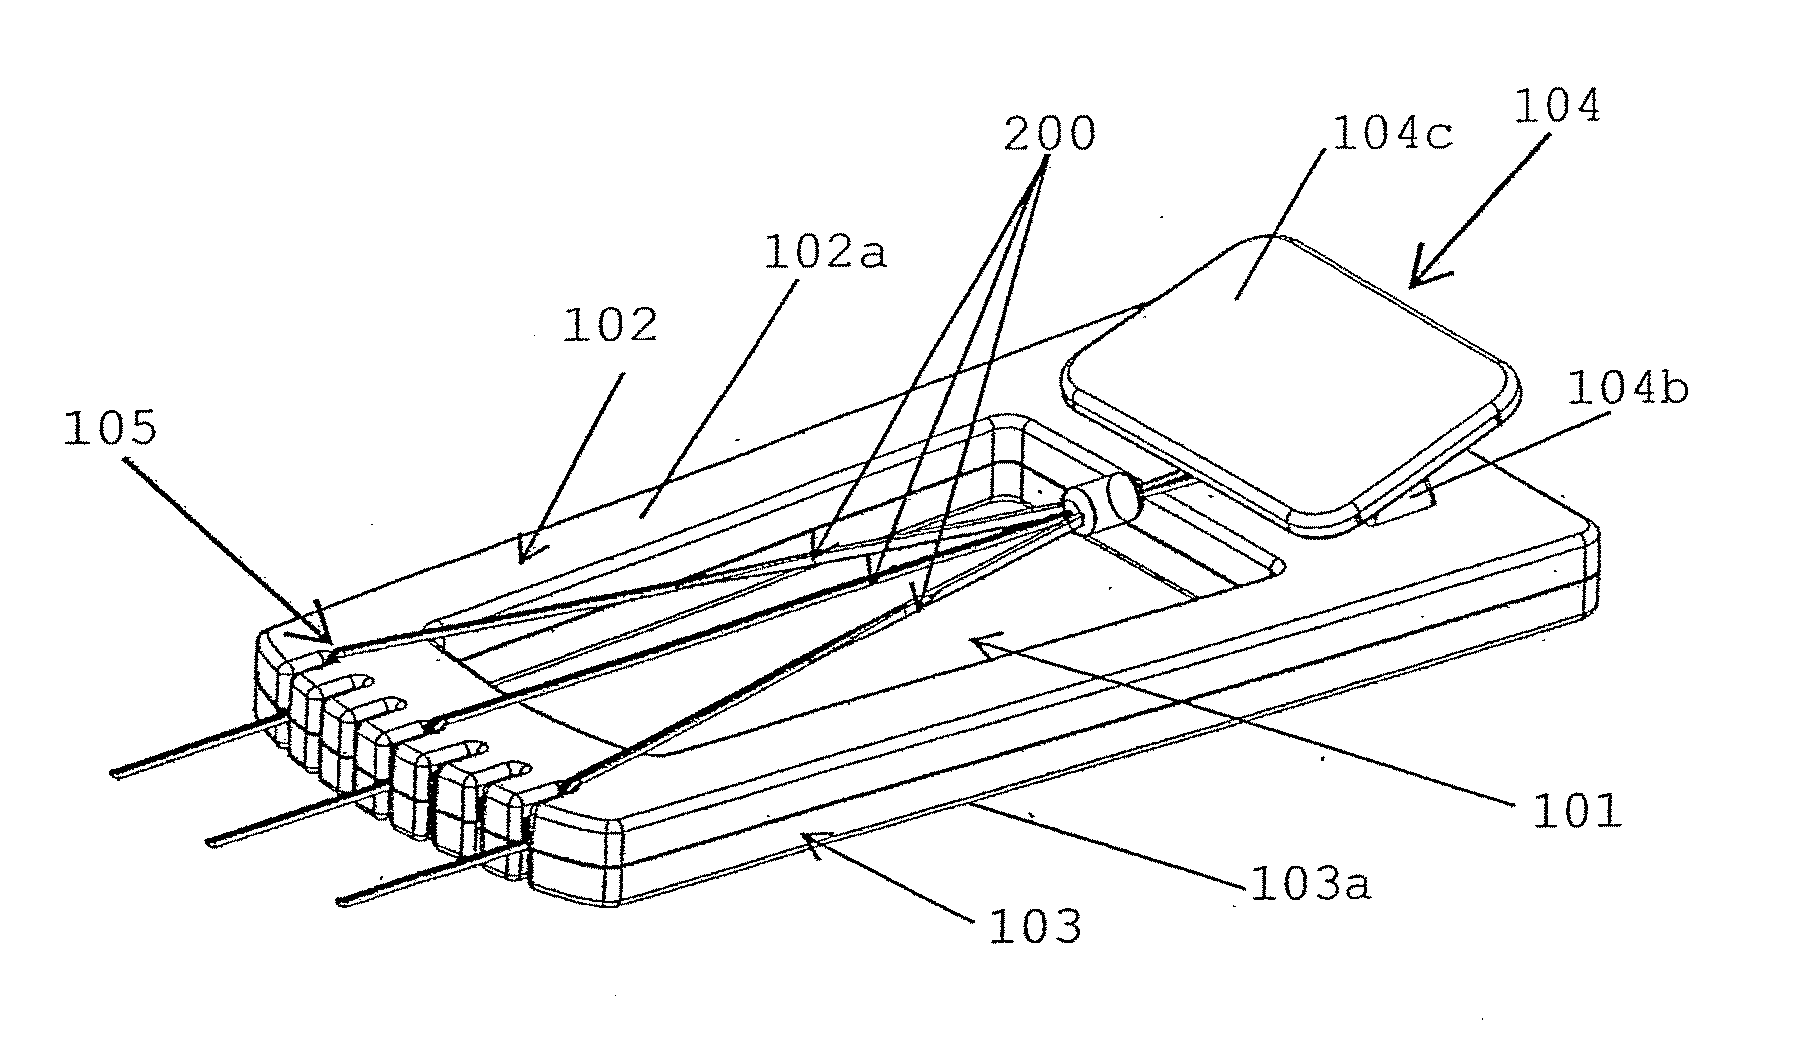 Device for weaving a linked item and a pack of pliable material for use in weaving the linked item